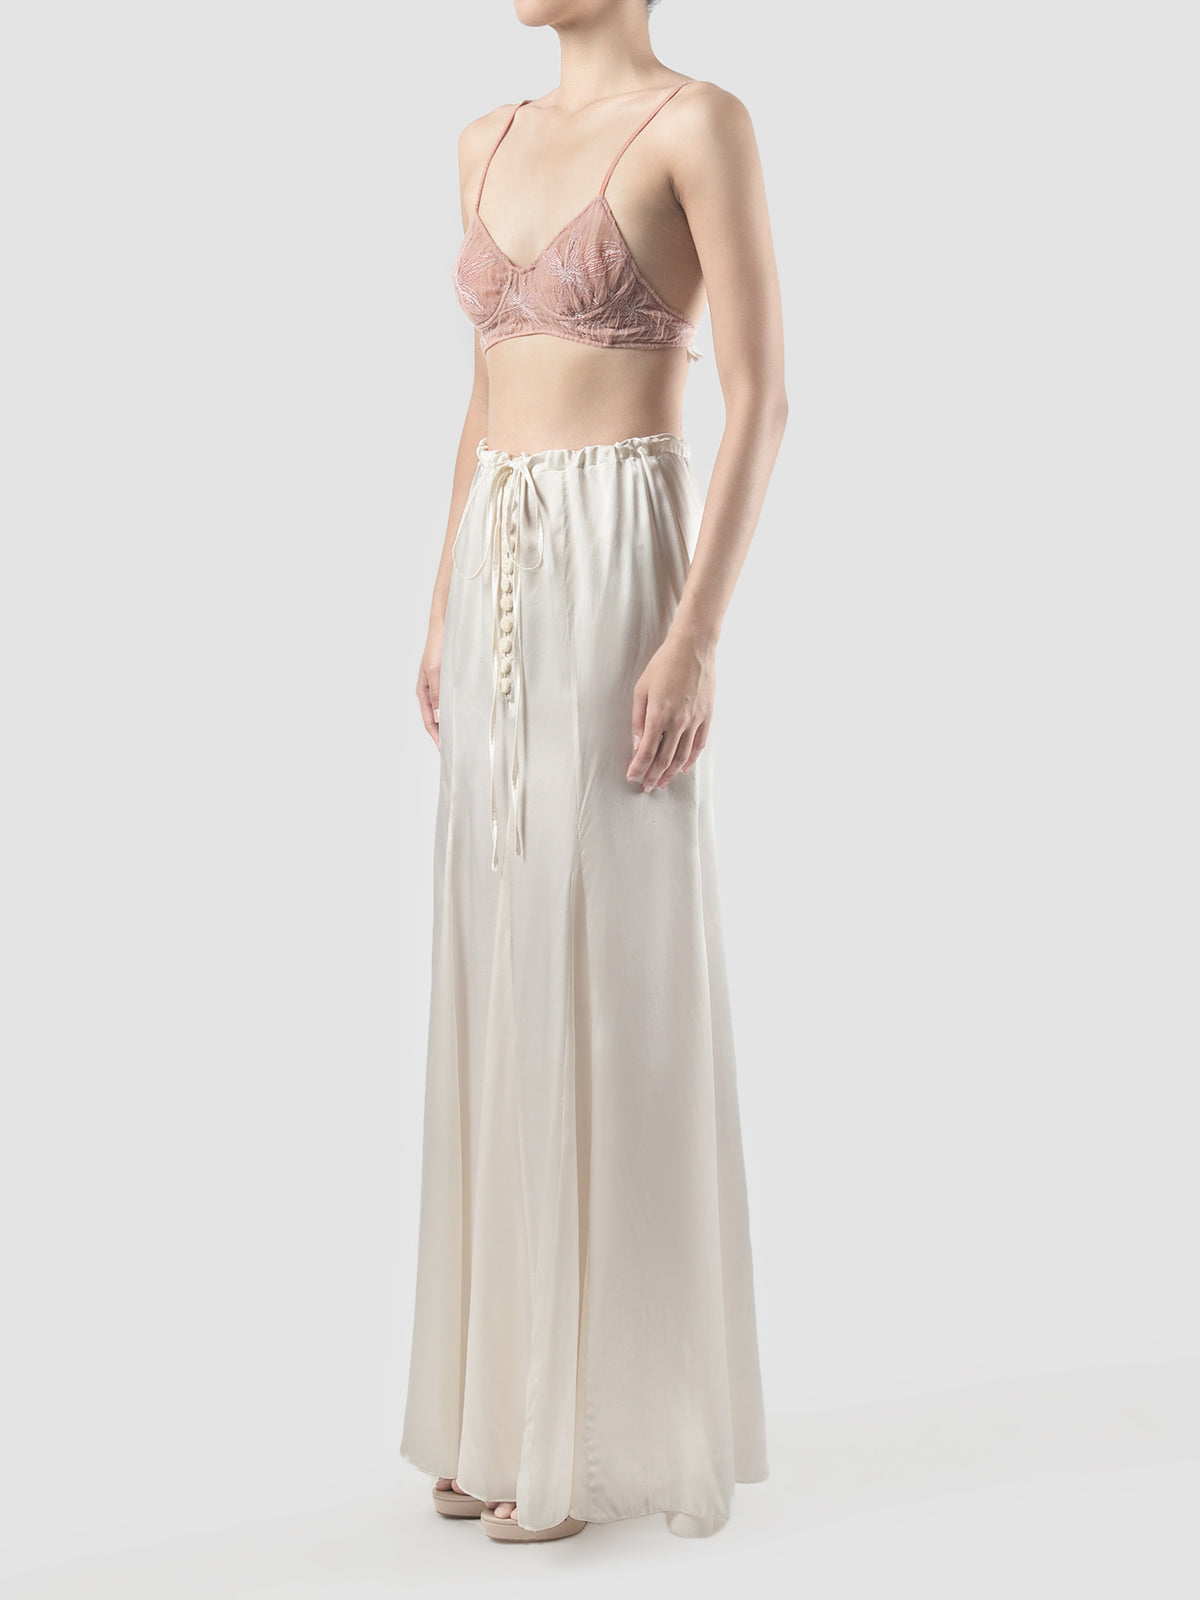 Gorden sheer pink bralette with pink-silver embroidery